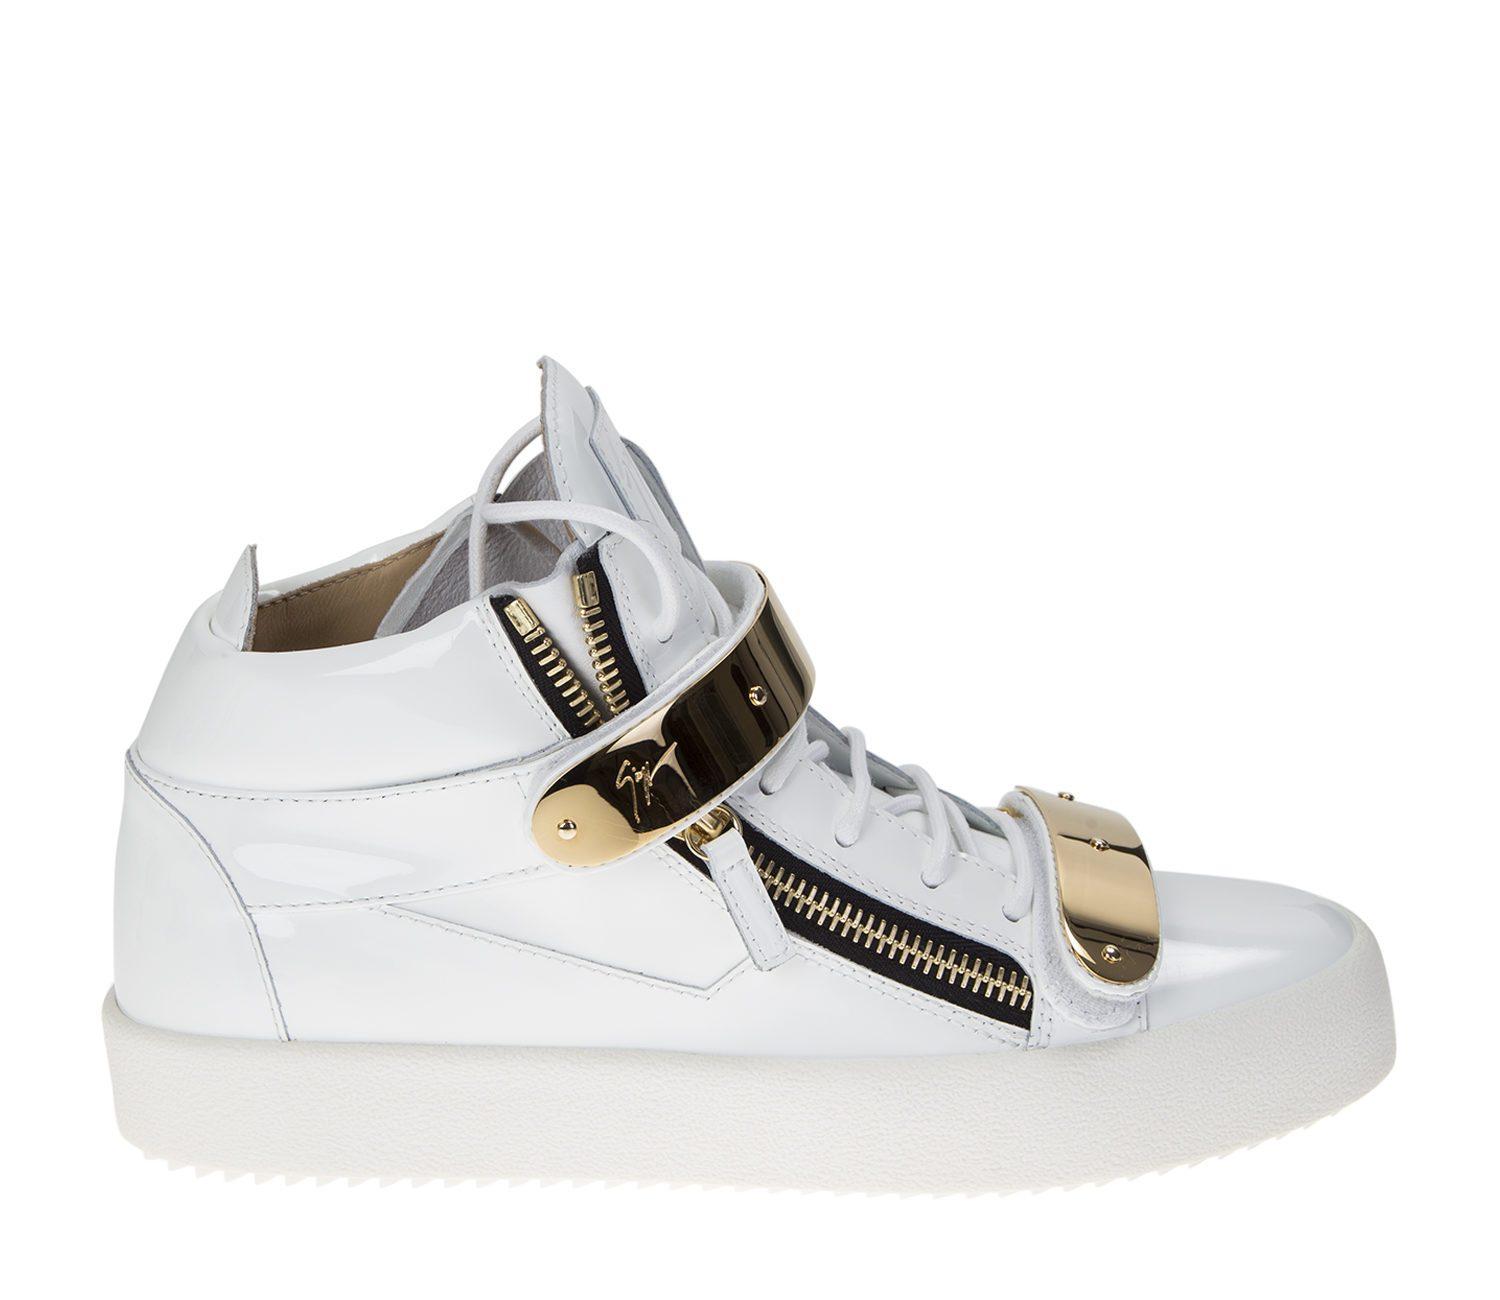 Lyst - Giuseppe Zanotti White Leather Sneakers With Strap Gold Metal in ...